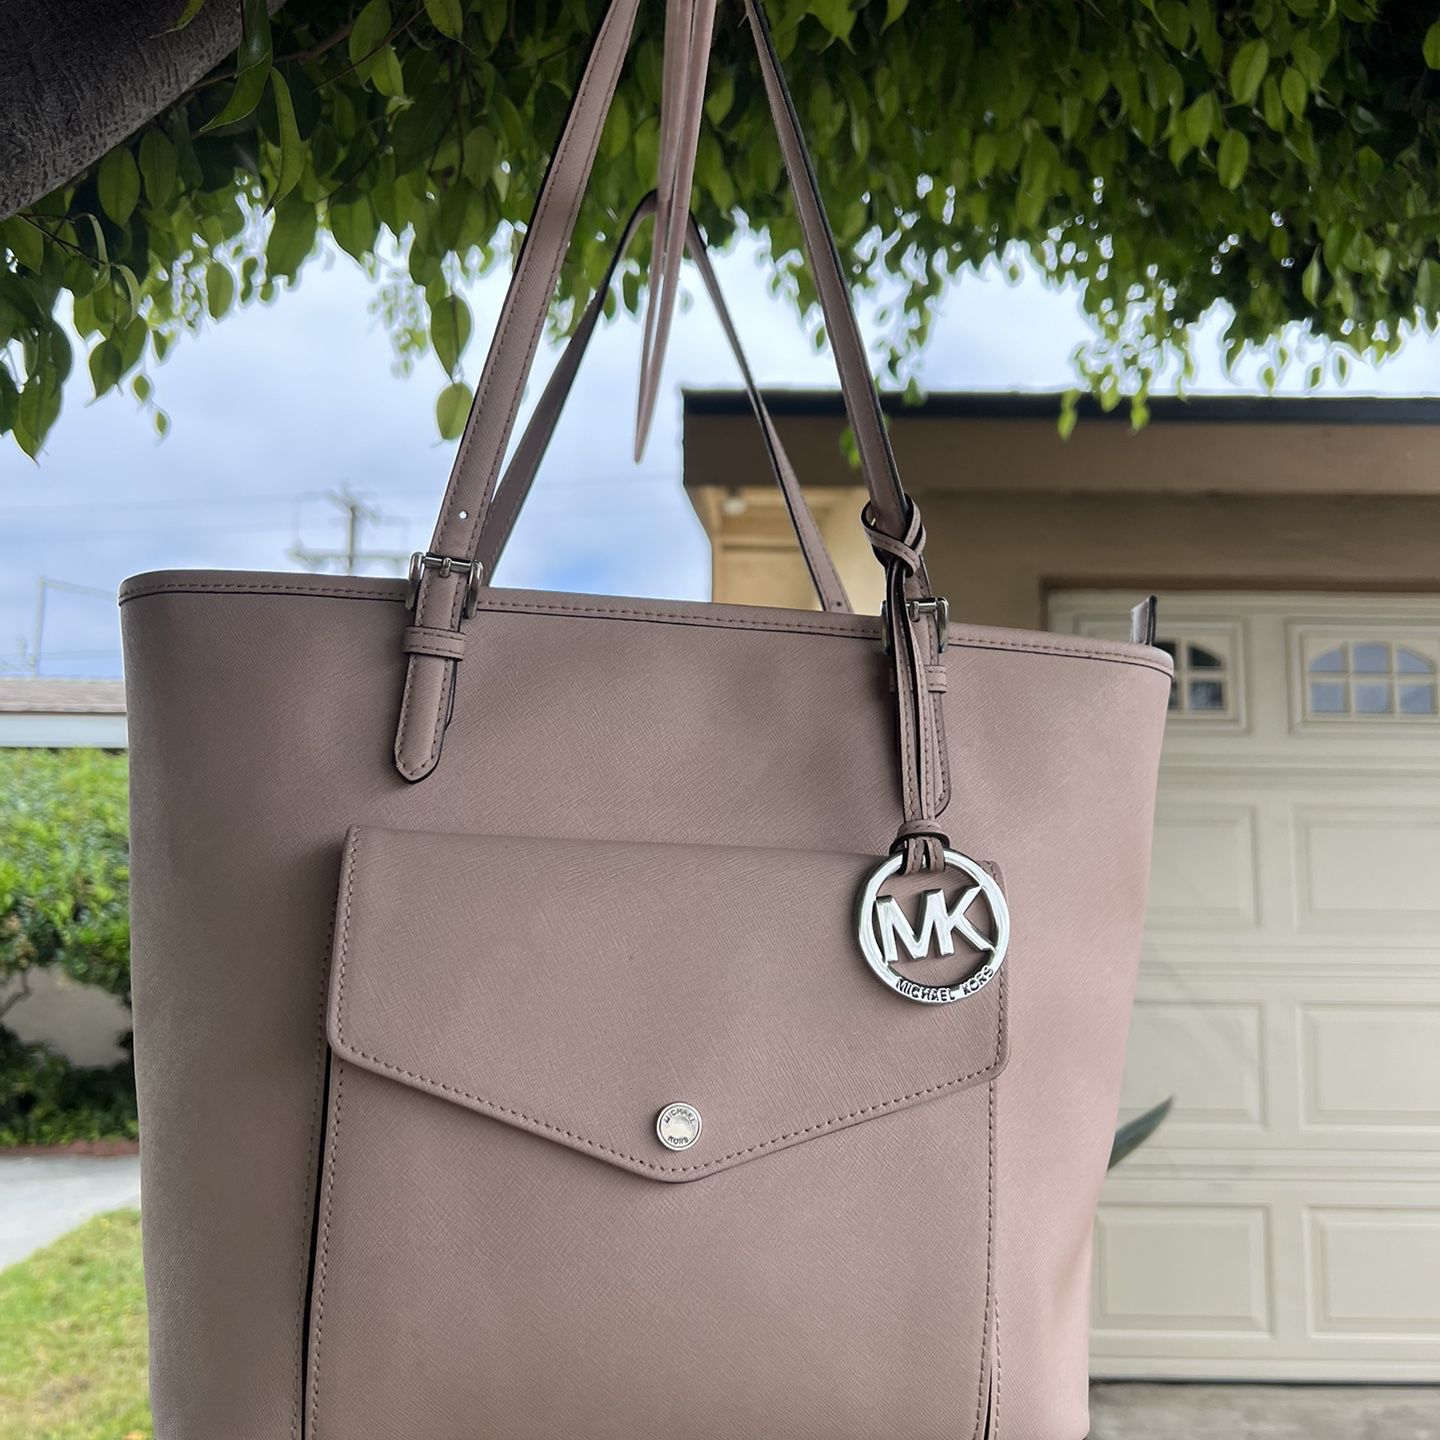 MICHAEL KORS BAGS for Sale in Santa Ana, CA - OfferUp